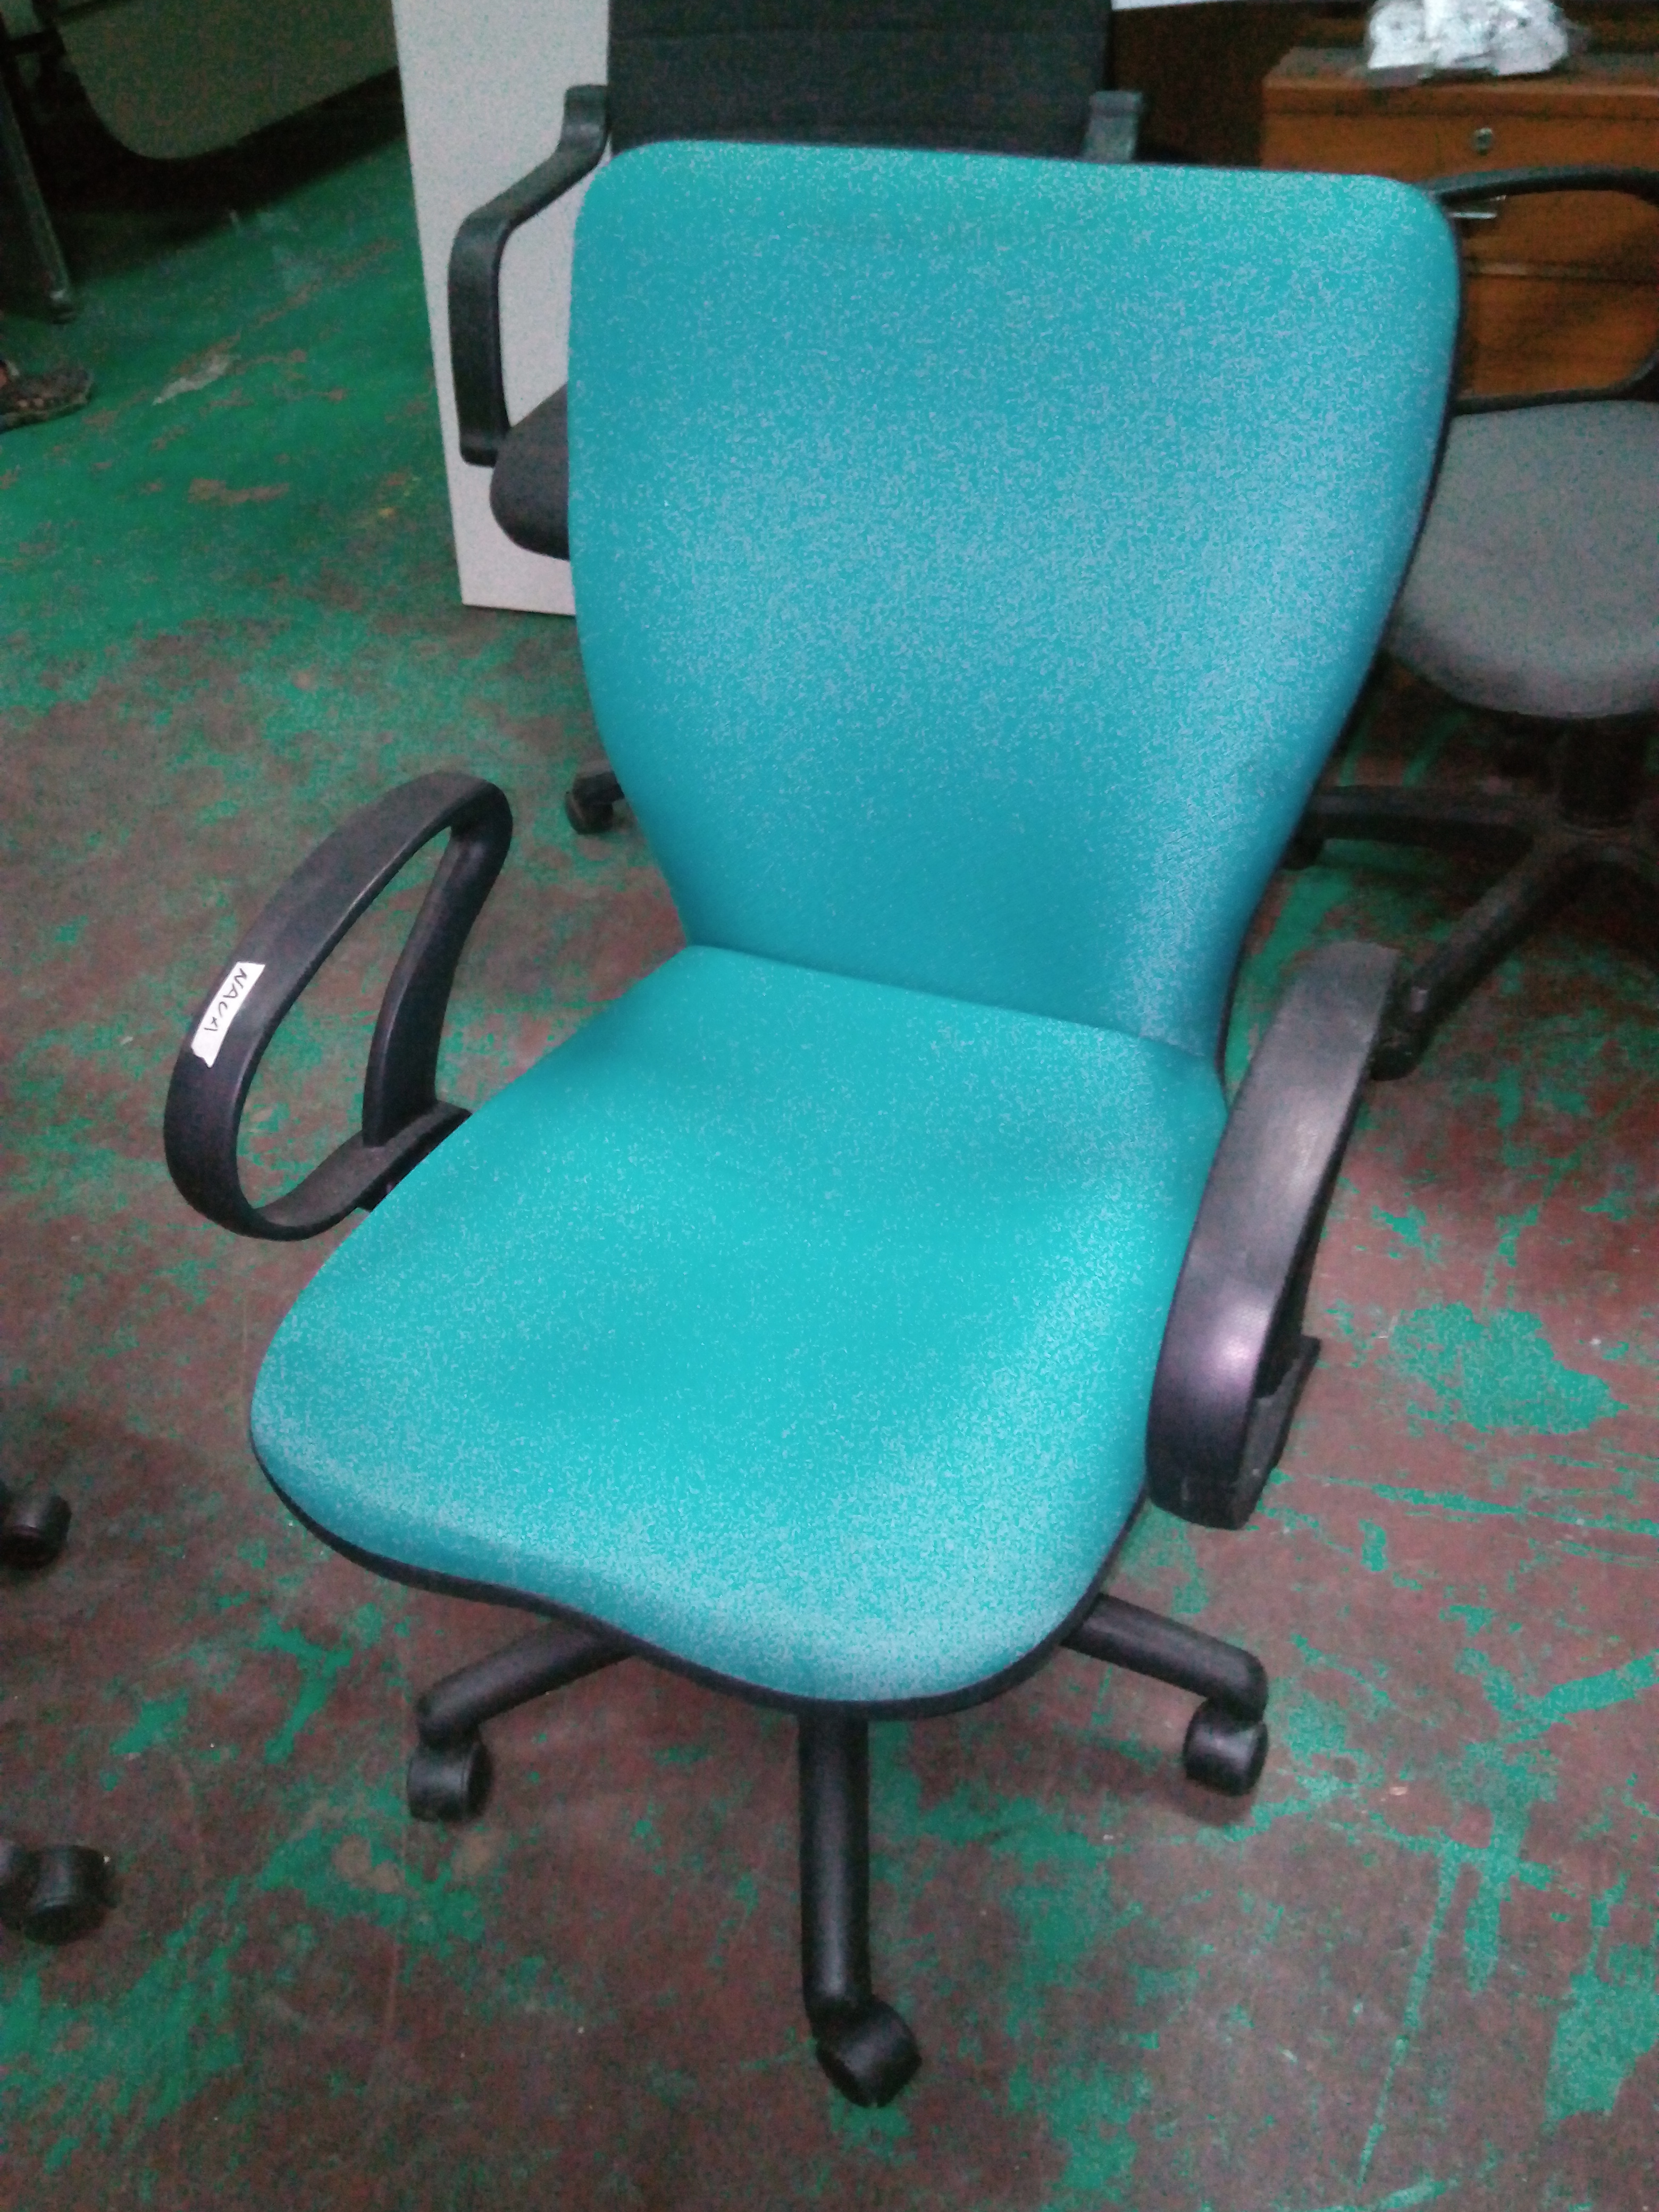 Secondhand Office Chair | Used Office Furniture Philippines